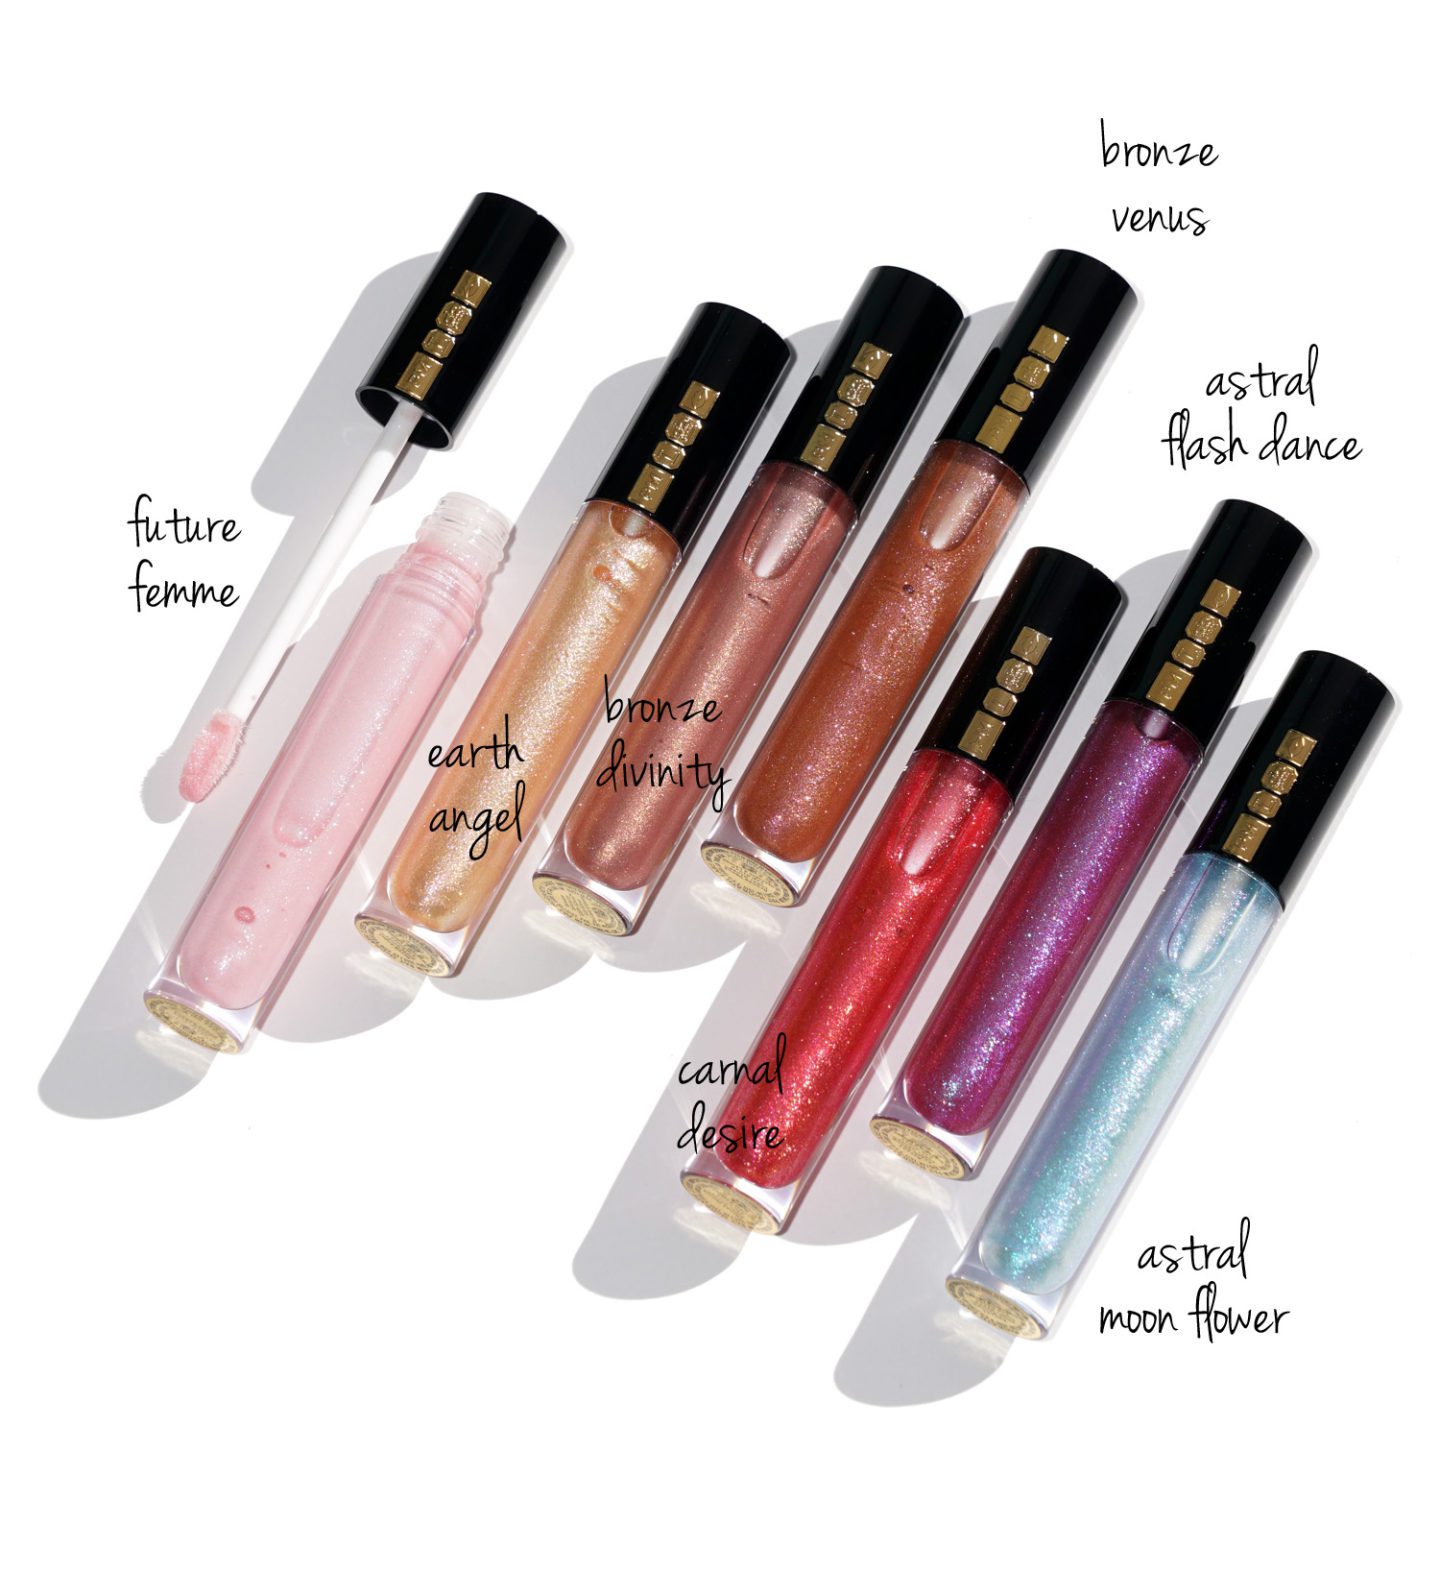 Pat McGrath Lust Gloss shimmers: Future Femme, Earth Angel, Bronze Divinity, Bronze Venus, Carnal Desire, Astral Flash Dance and Astral Moon Flower review | The Beauty Look Book